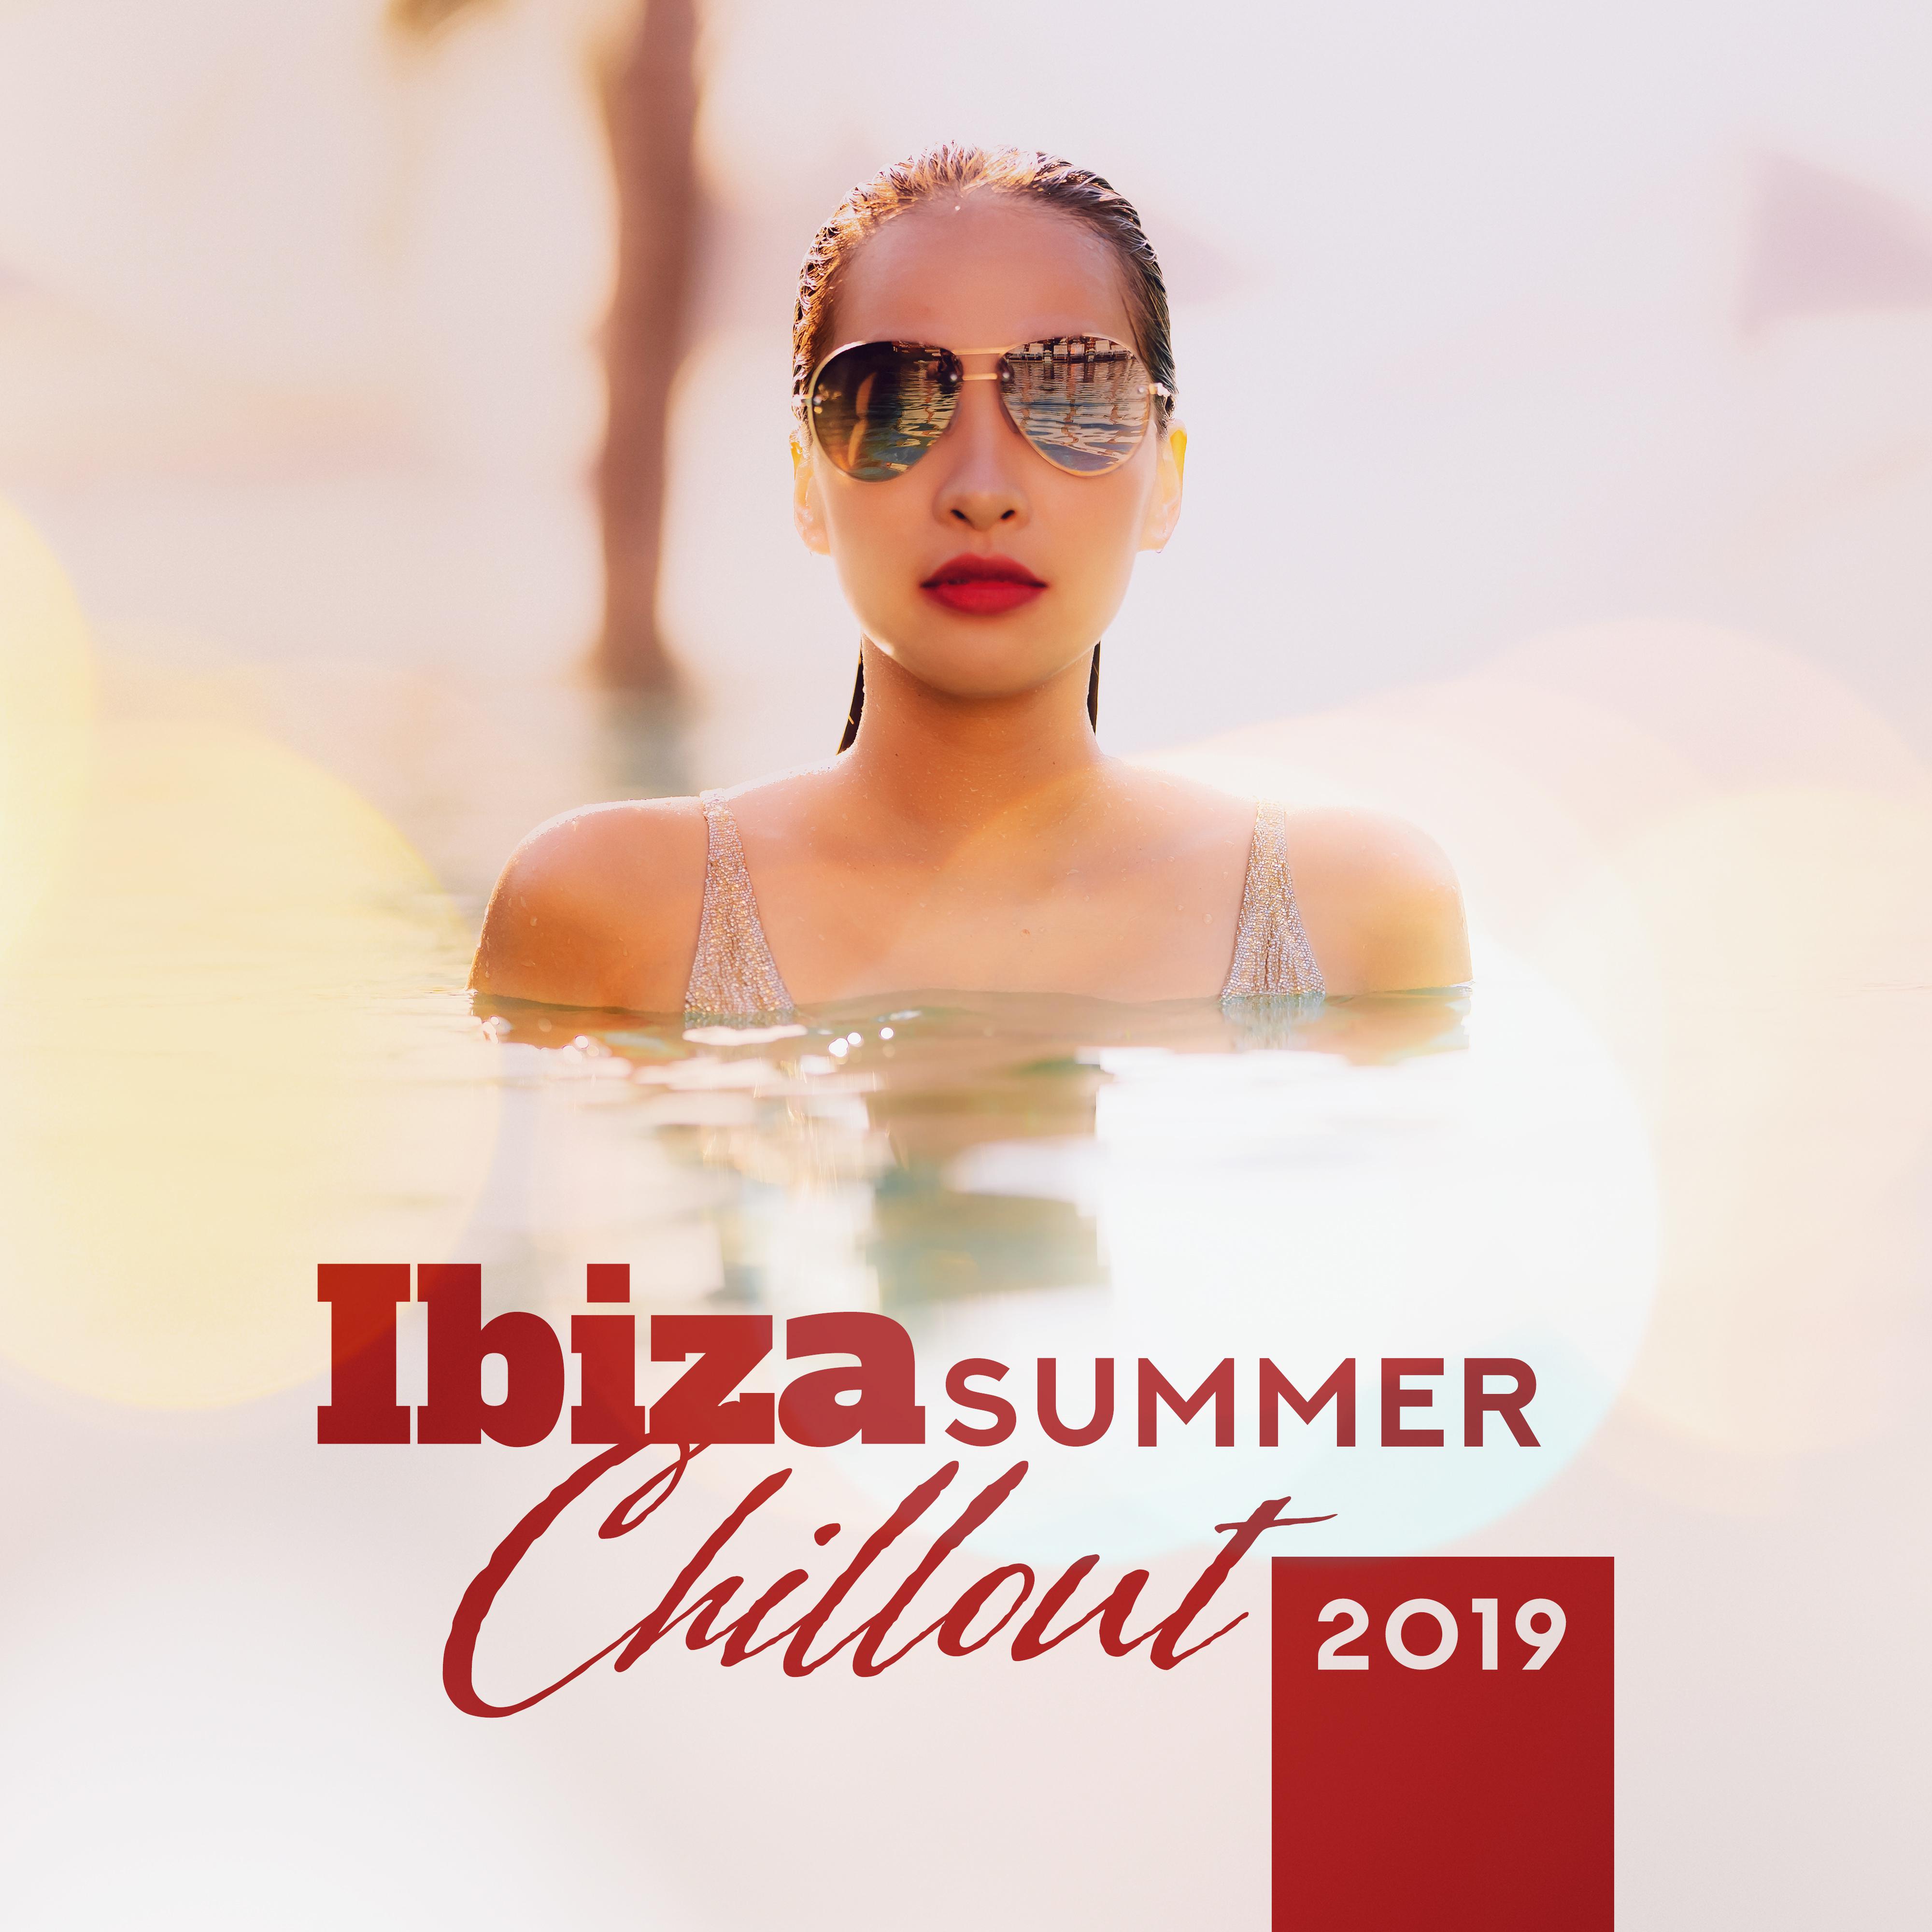 Ibiza Summer Chillout 2019 - Collection of 15 Summertime Songs from Ibiza to Relax and Unwind